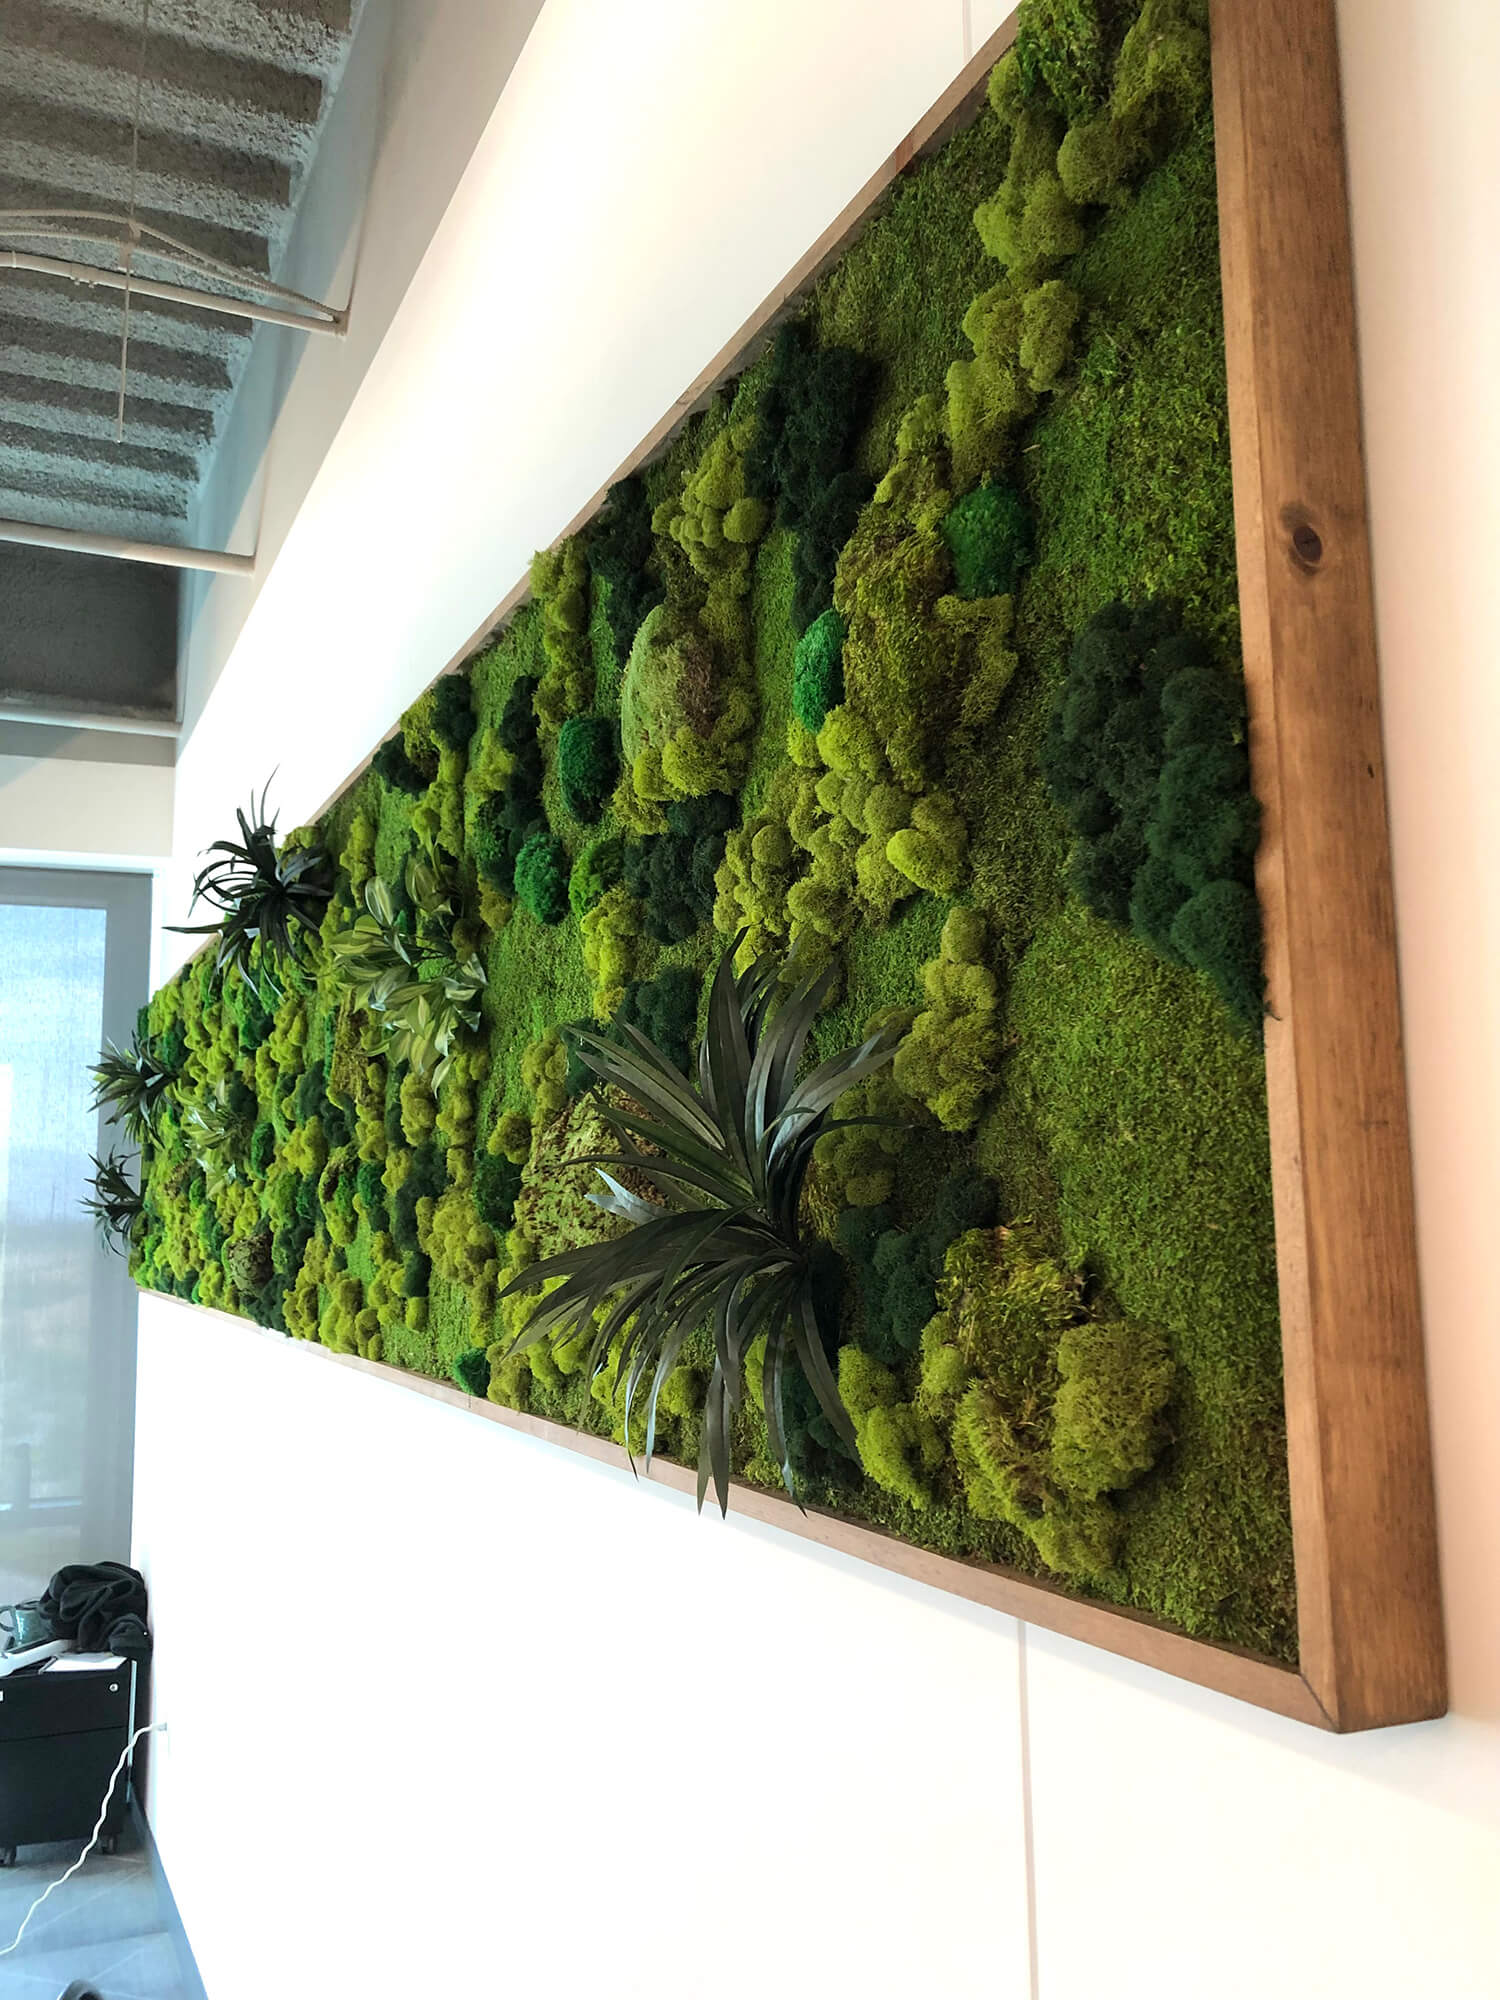 Moss wall art for residential or commercial settings, Created with preserved moss and plants. The perfect choice for anyone looking to bring the beauty of nature indoors.